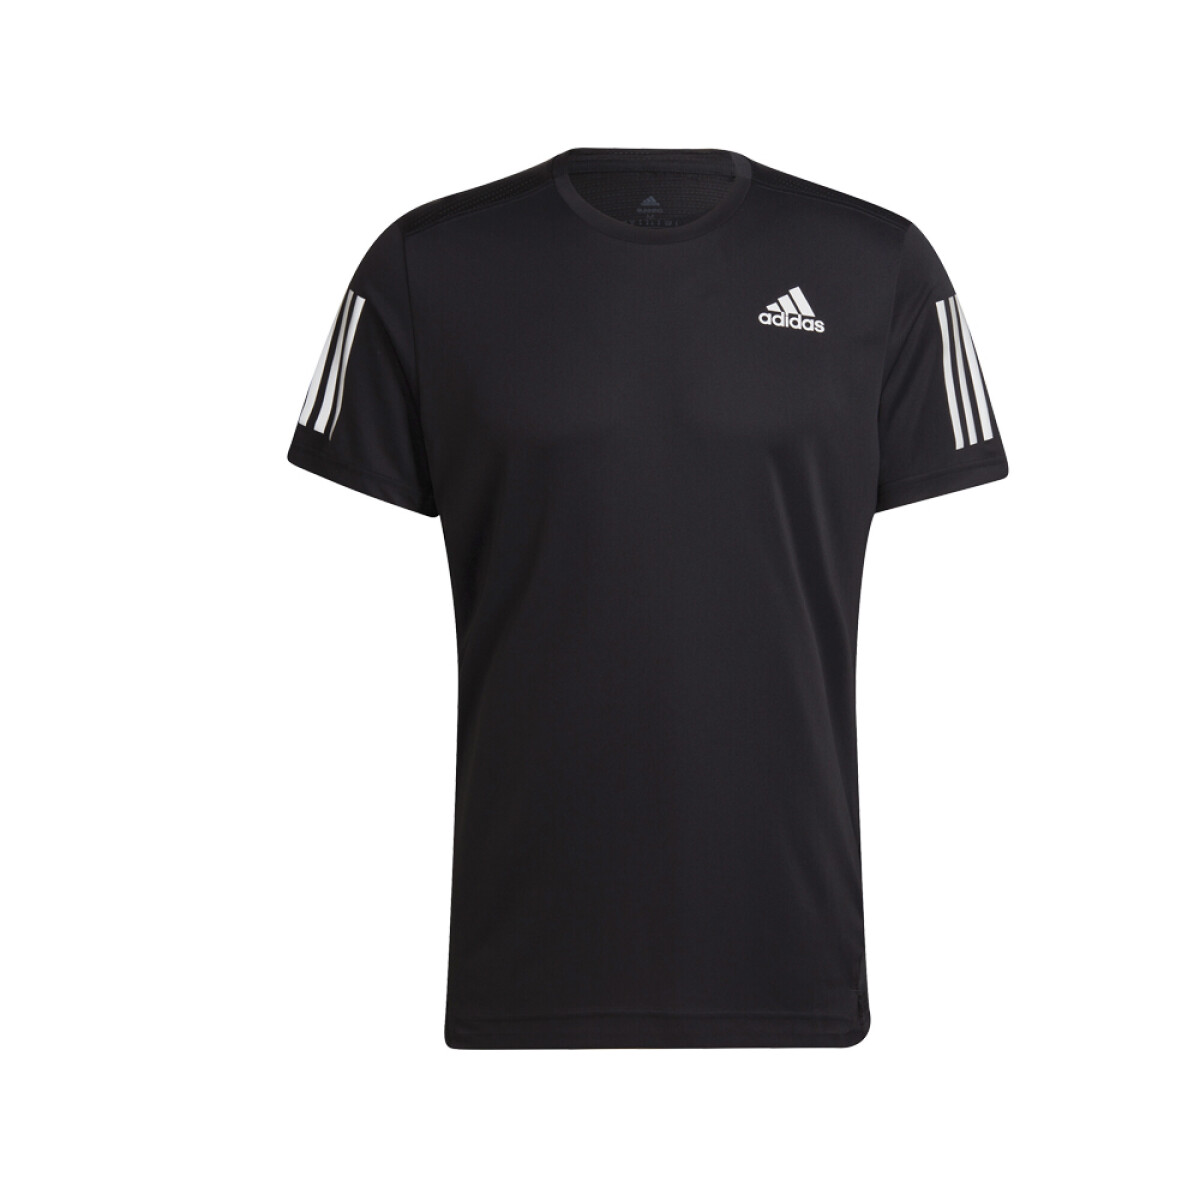 Remera Adidas Running Hombre Own The Run Tee - S/C 